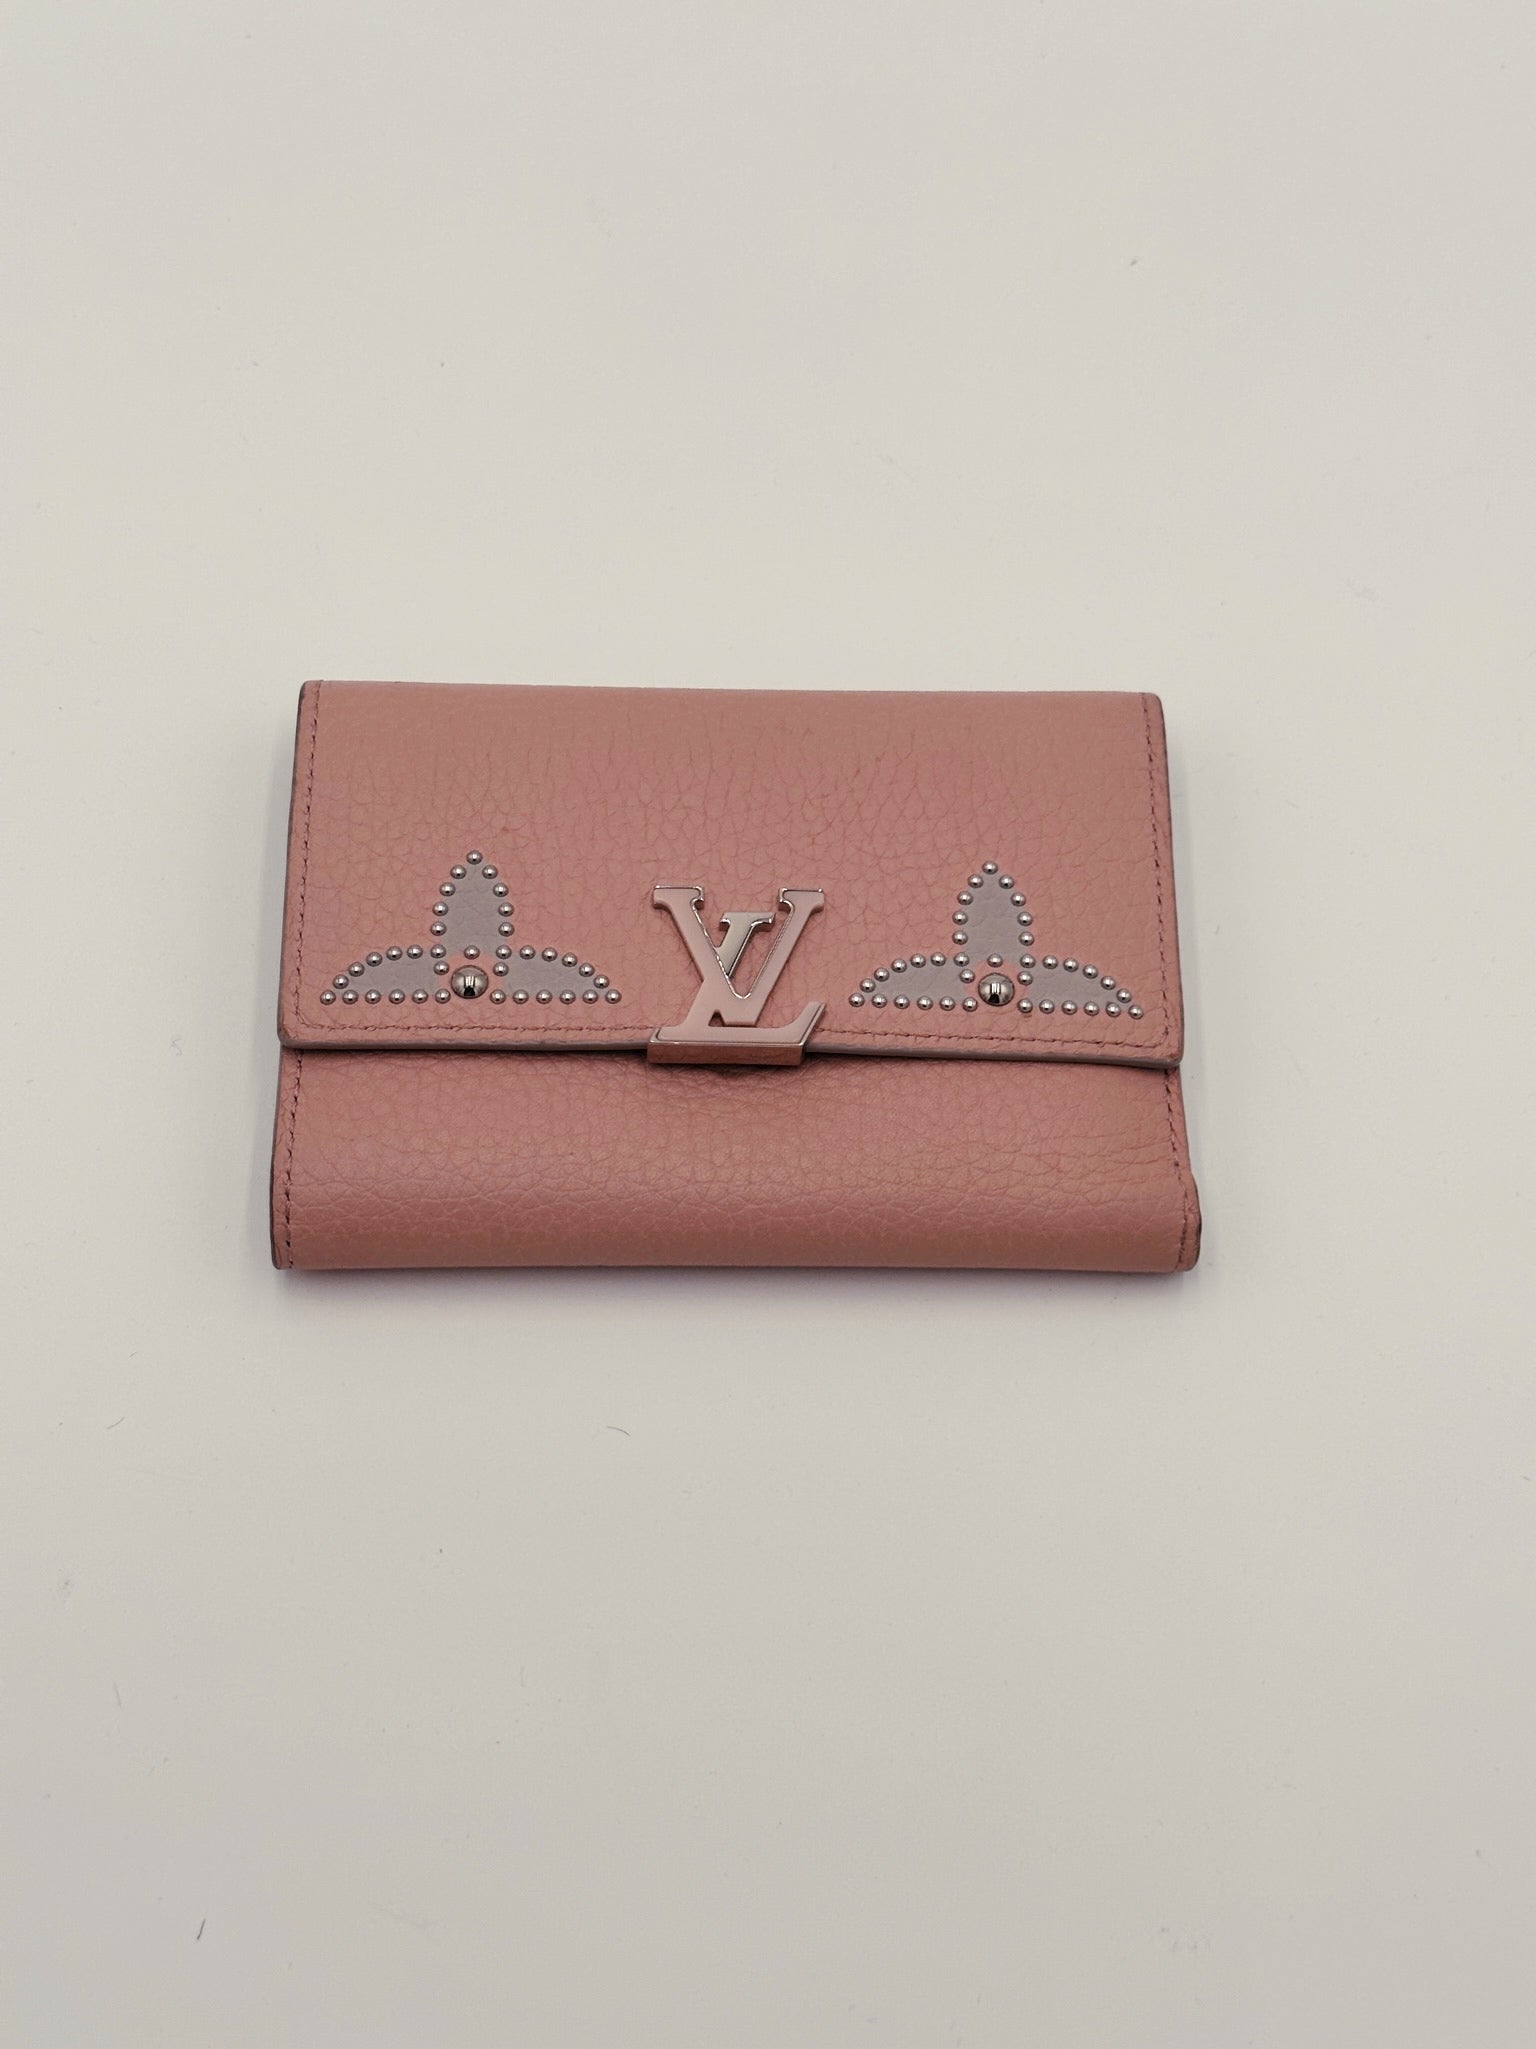 LV CAPUCINES NUDE PINK LEATHER WALLET